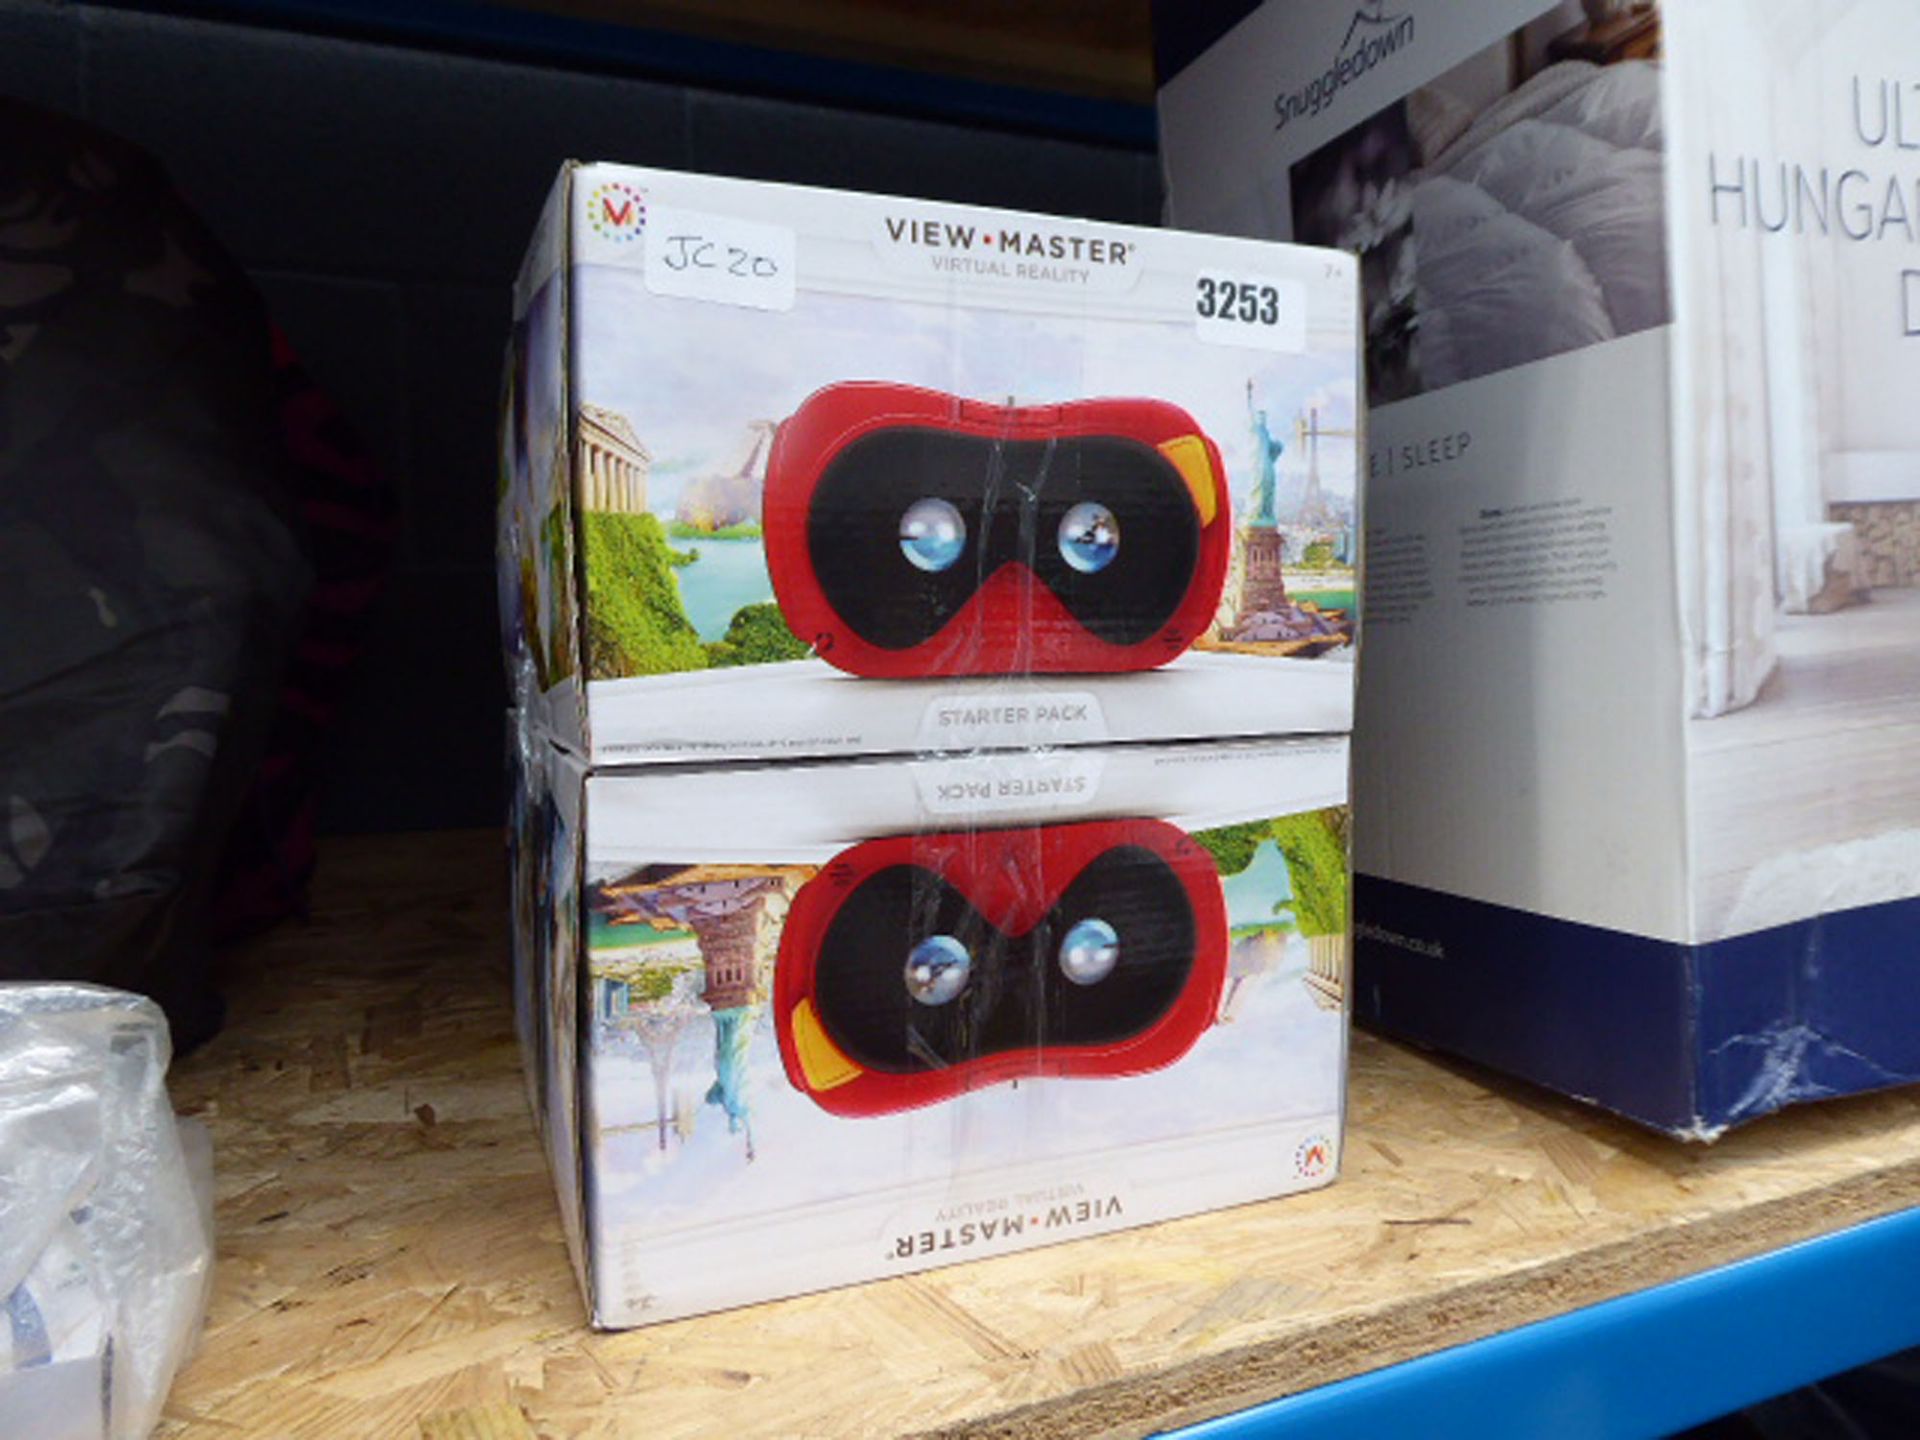 4 boxes of Viewmaster virtual reality starter packs